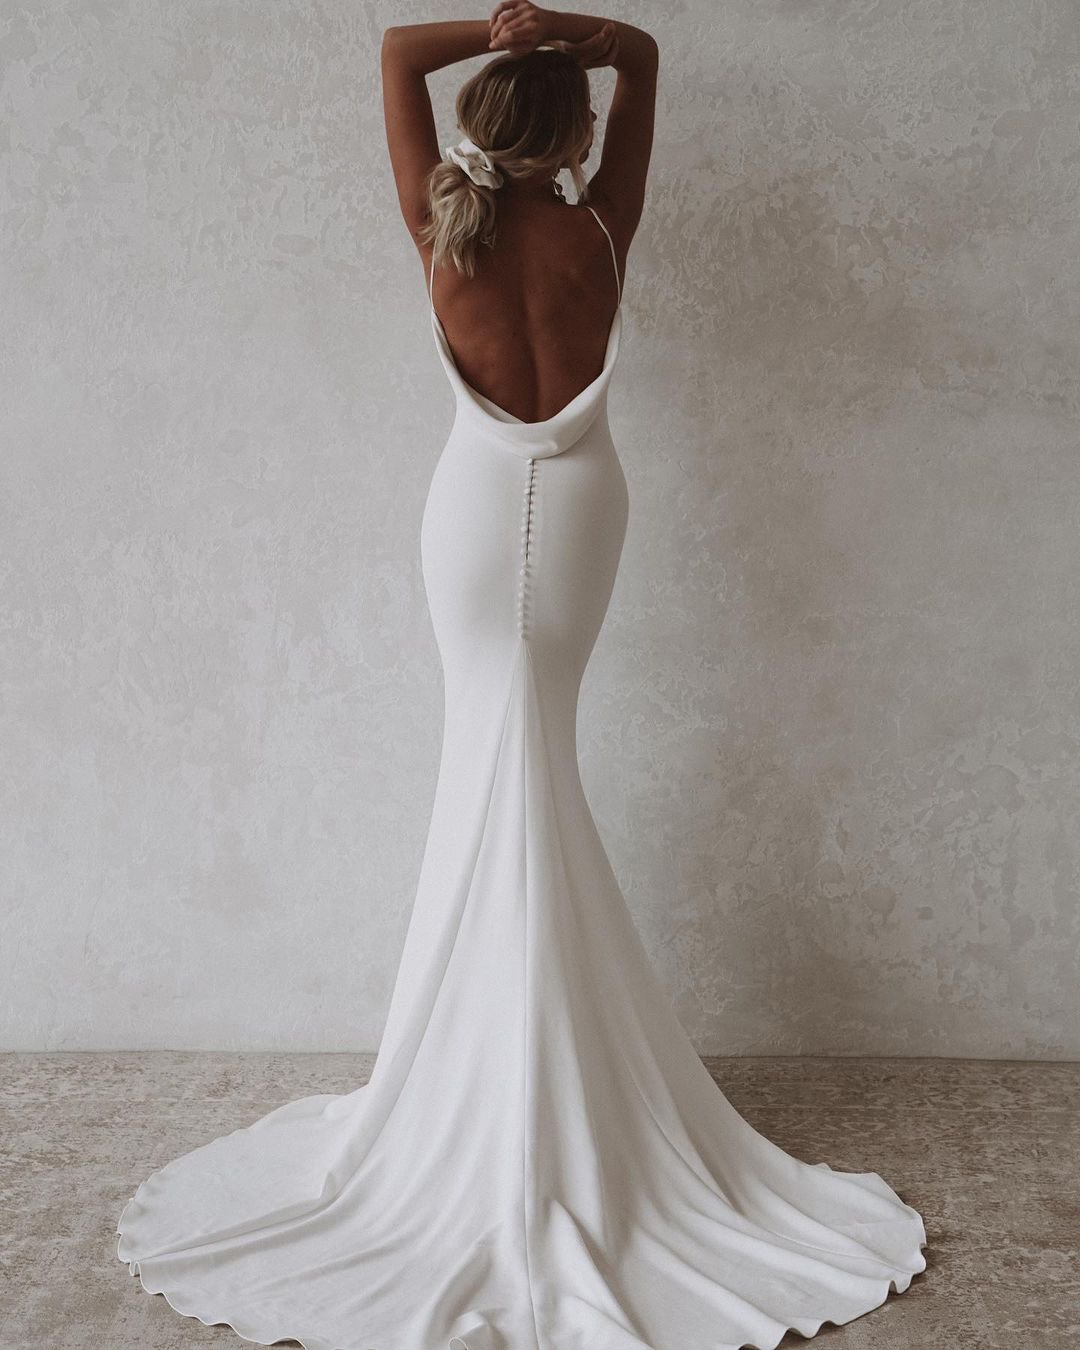 mermaid wedding dresses simple with spaghetti strap low back madewithlove